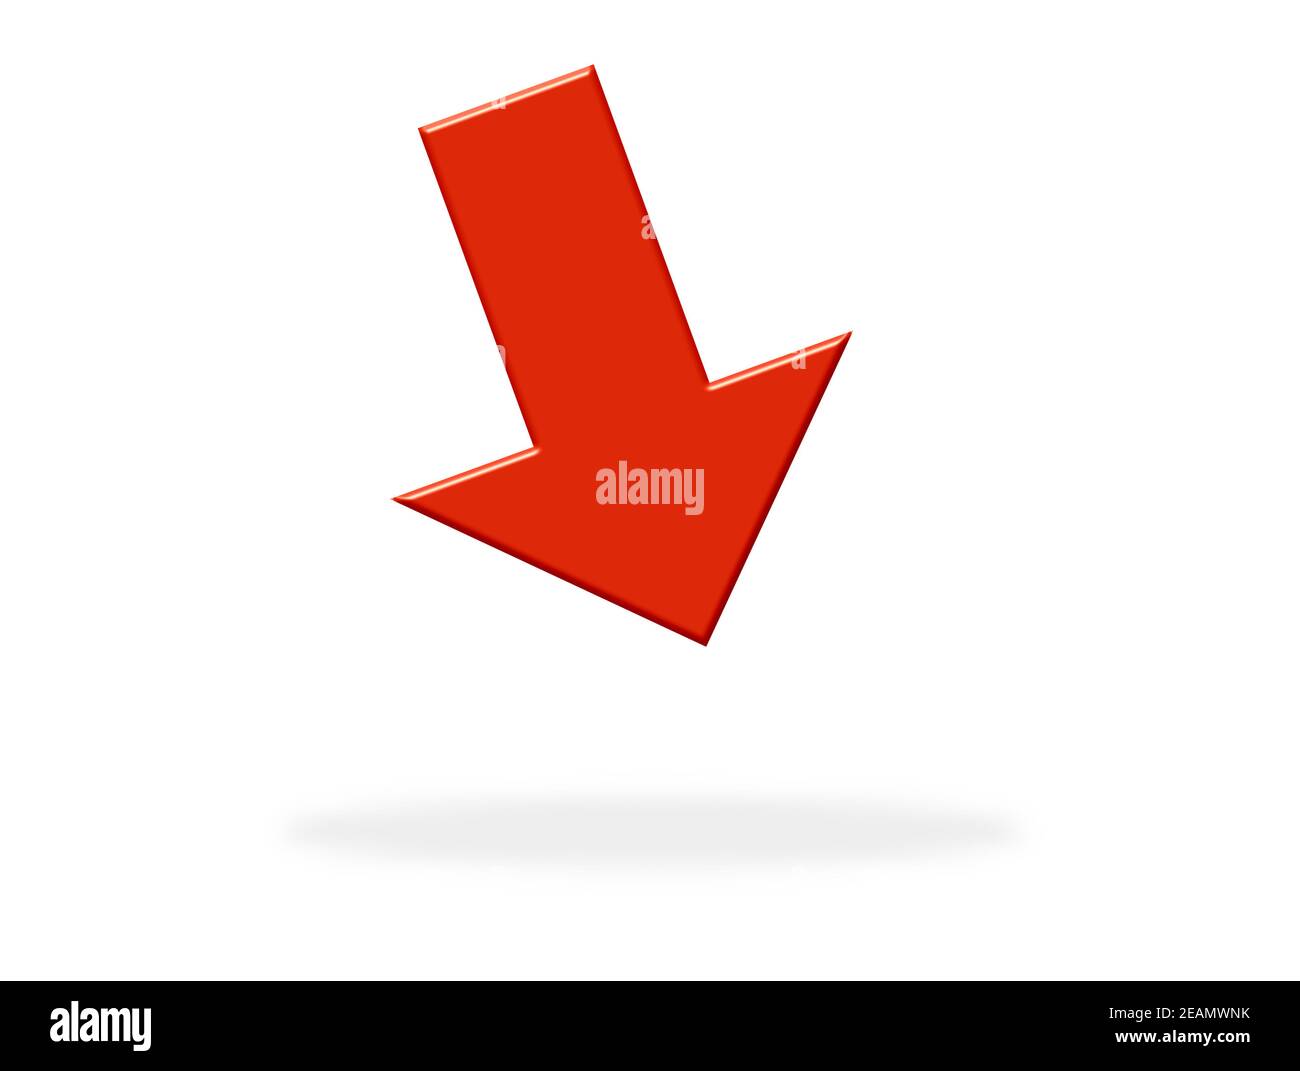 Financial Crash - Red arrow showing down Stock Photo